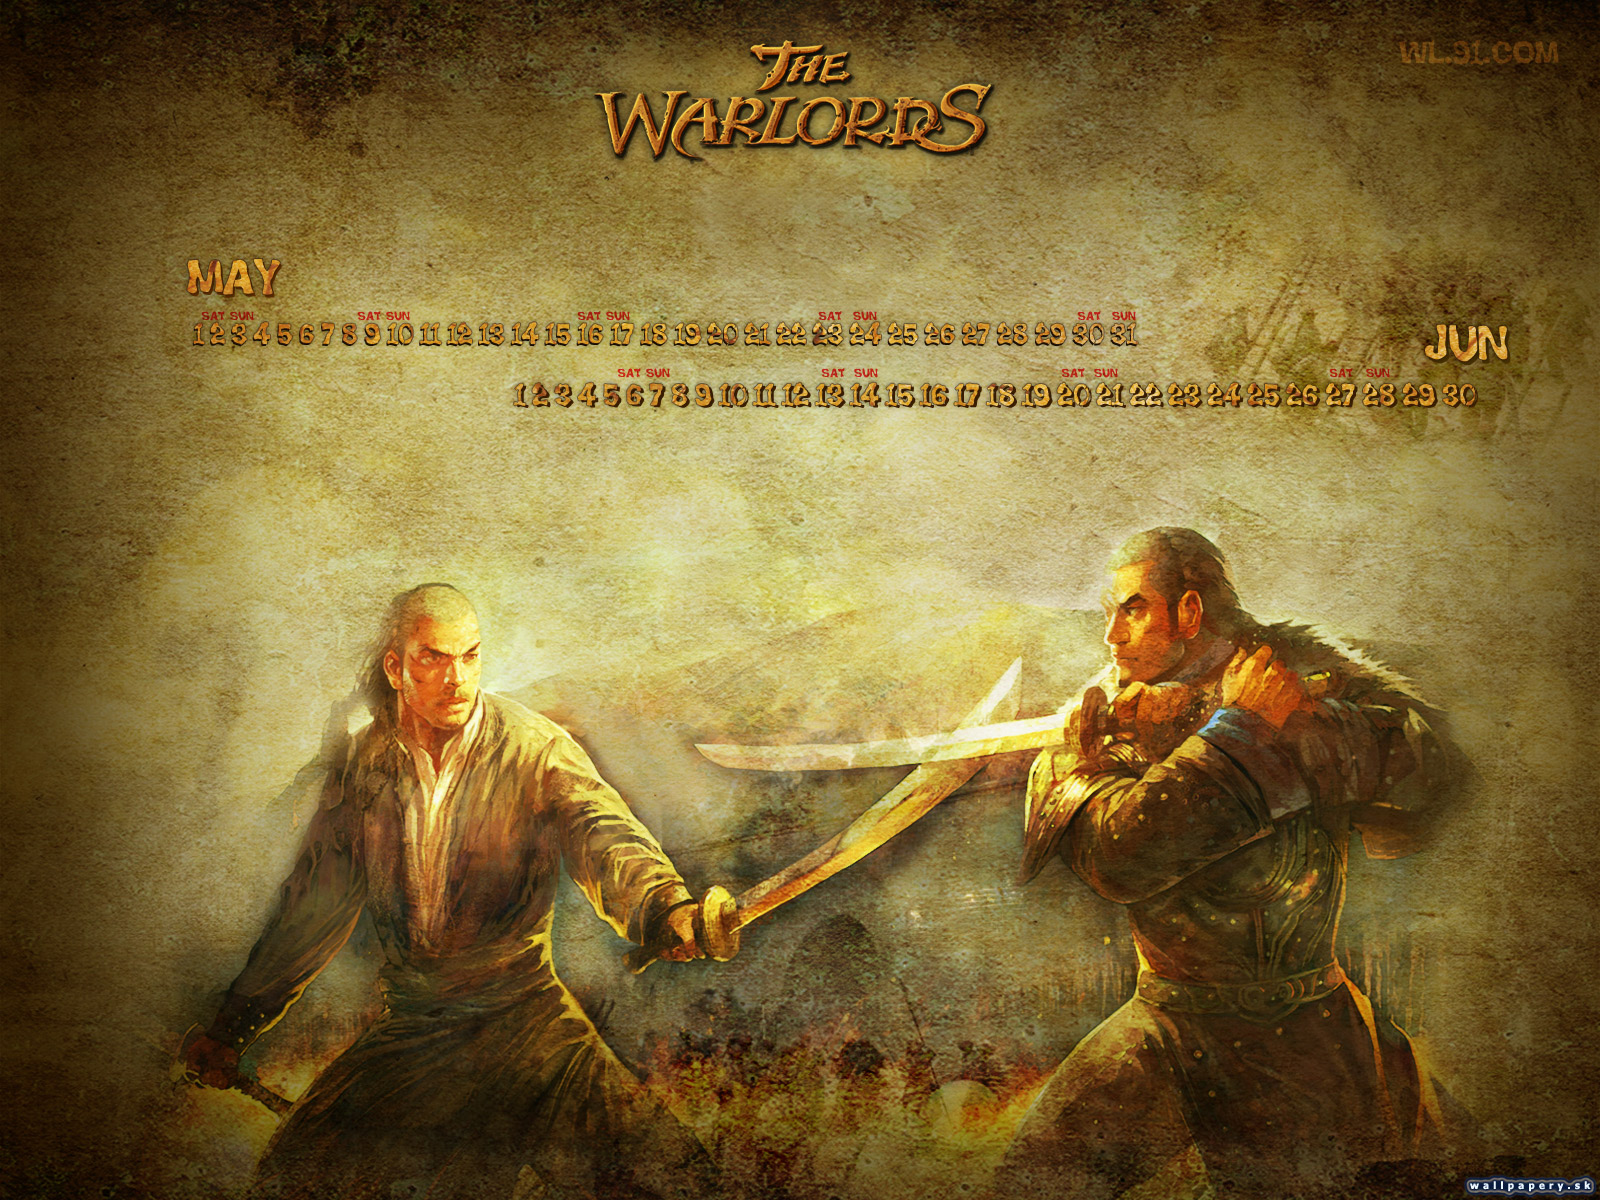 The Warlords - wallpaper 29